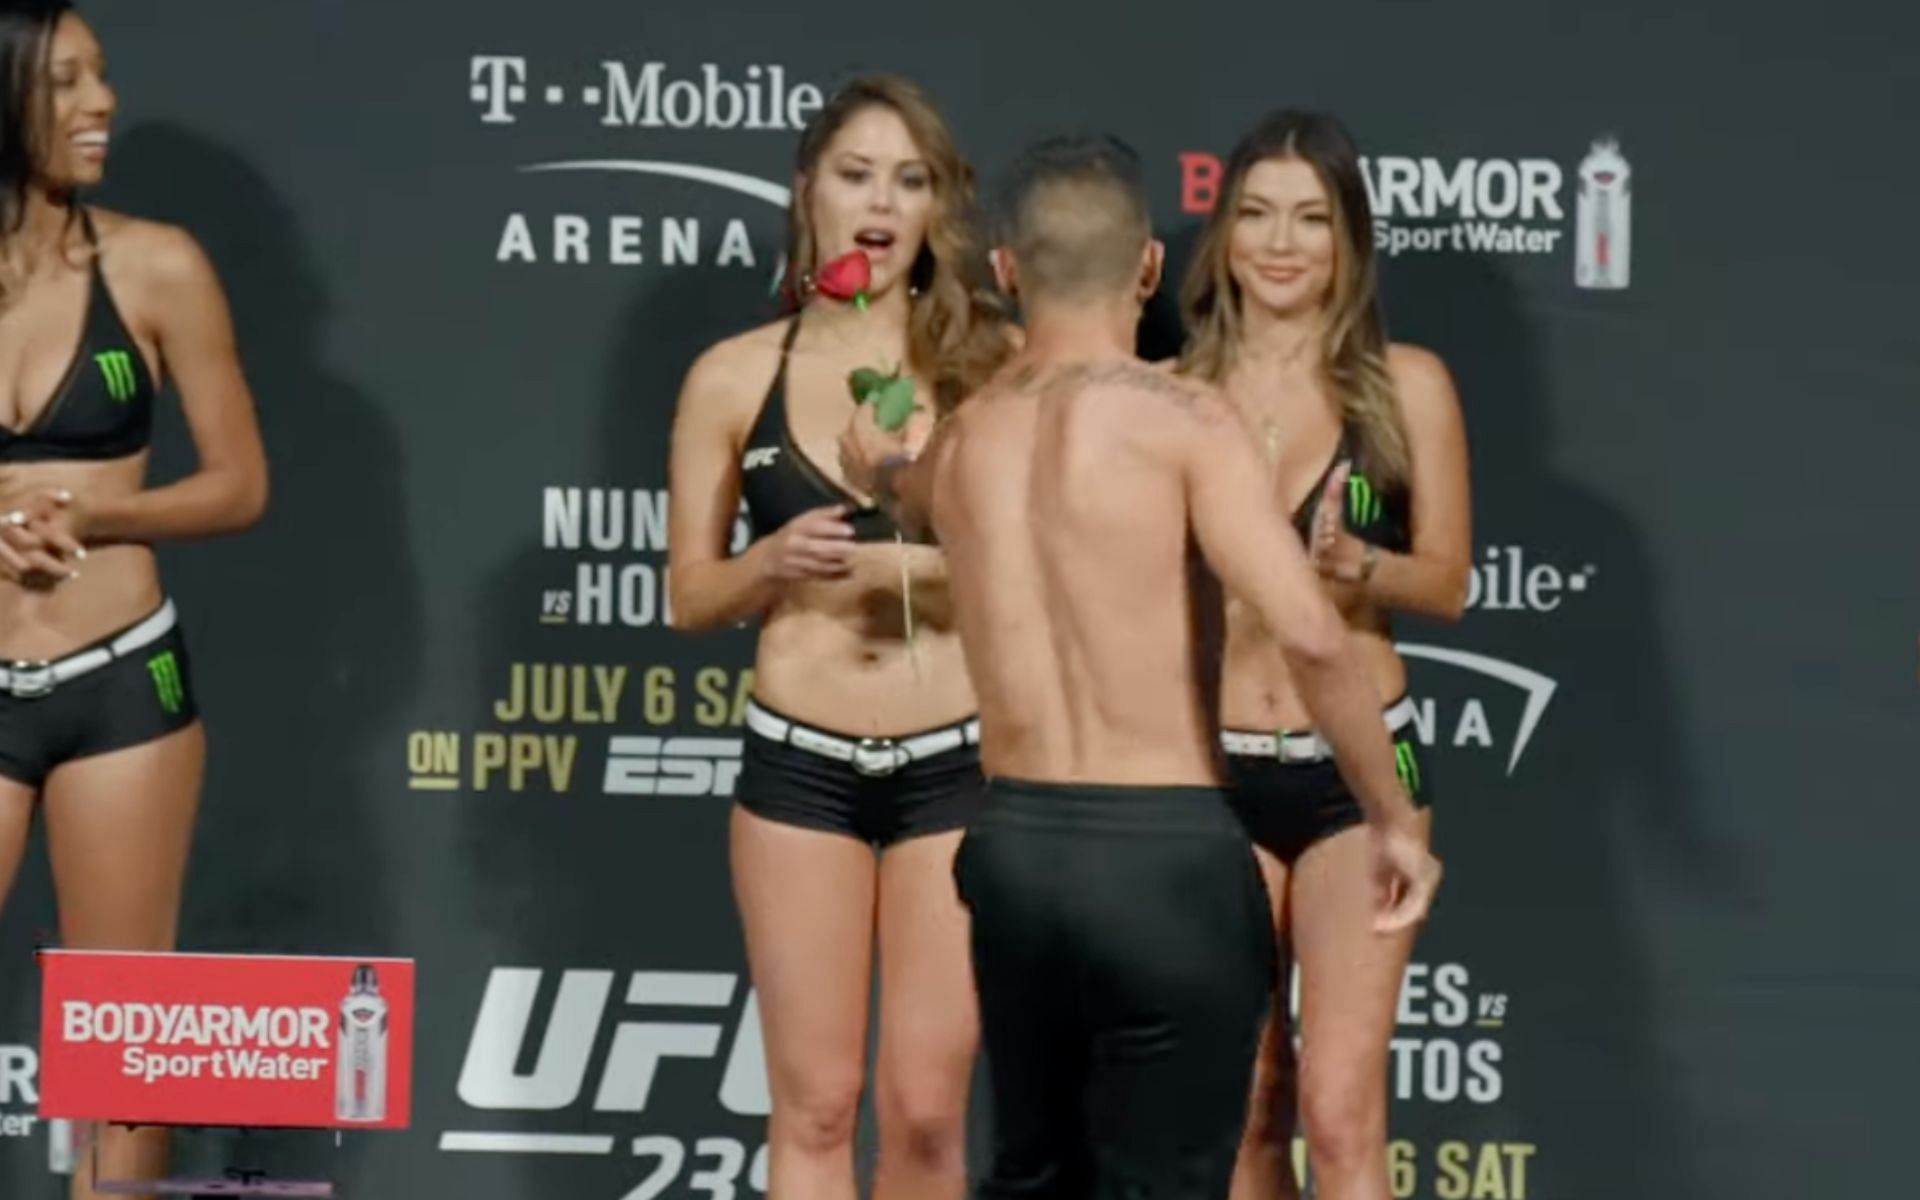 Nohelin Hernandez (front) giving Brittney Palmer (back) a rose at the UFC 239 weigh in [Photo Courtesy of MMAFightingonSBN on YouTube]